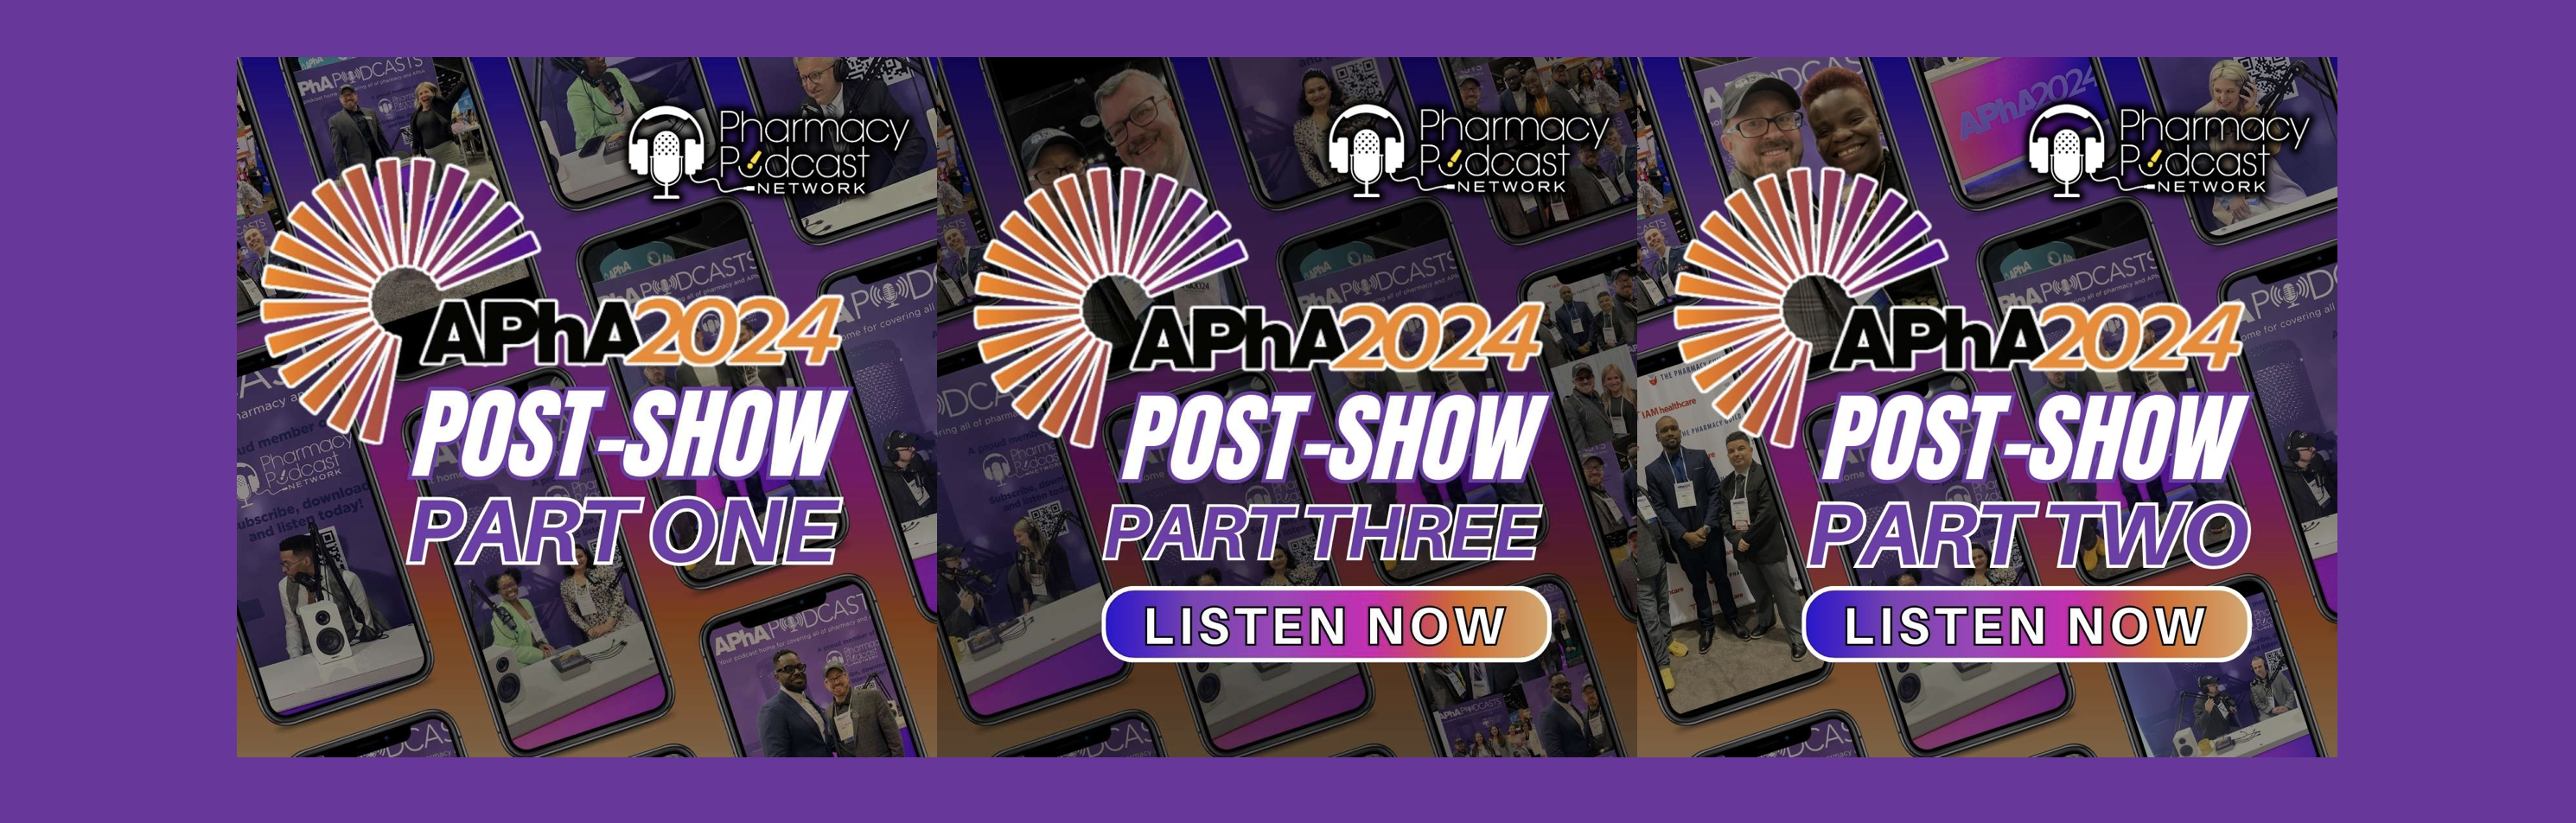 The 2024 APhA Podcast Post Show